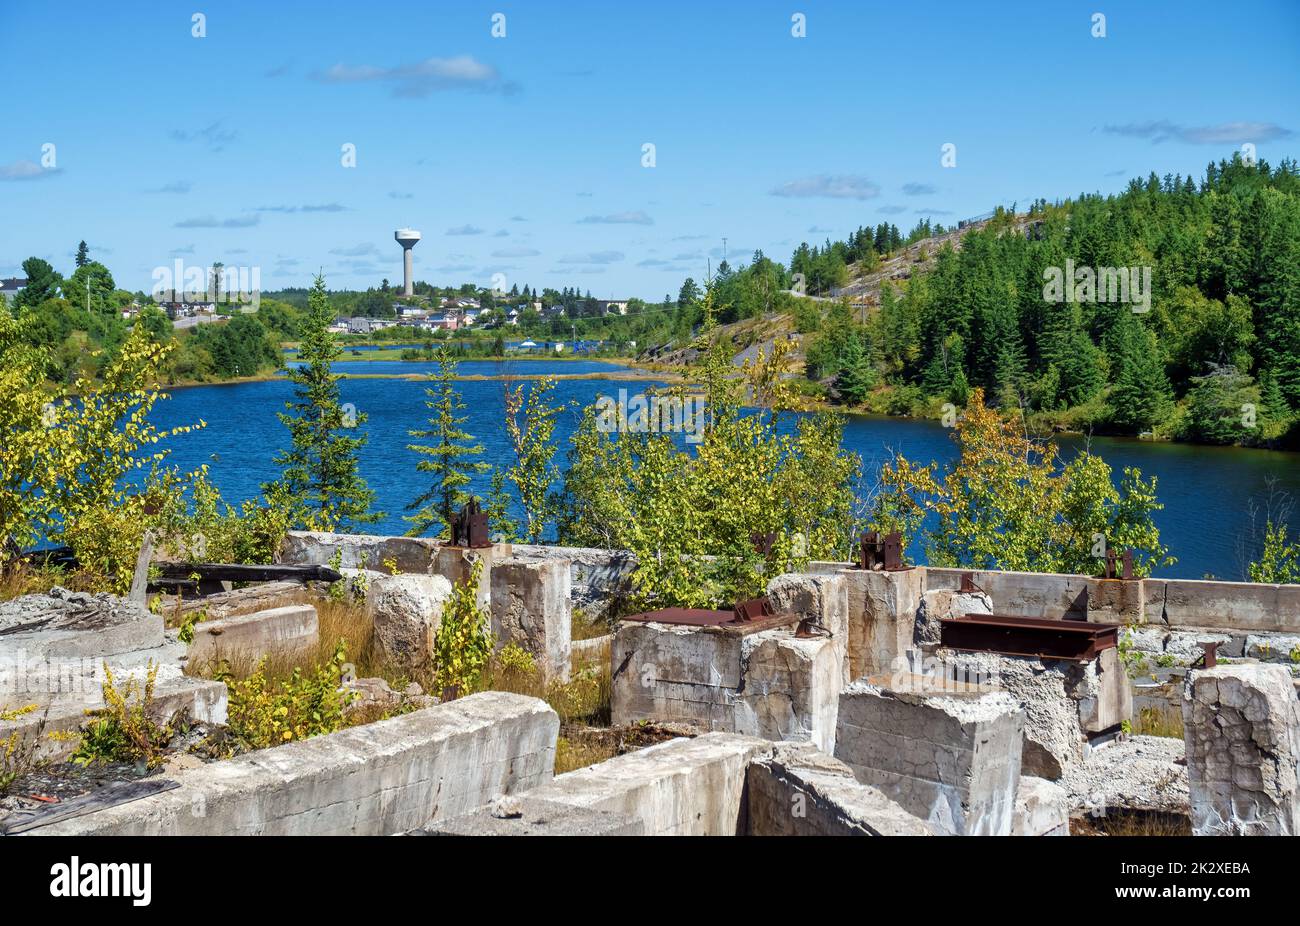 From the ruins of abandoned Hellens Mill along the Silver Heritage Trail, looking at the blue water of Cobalt Lake and skyline of the town. Stock Photo